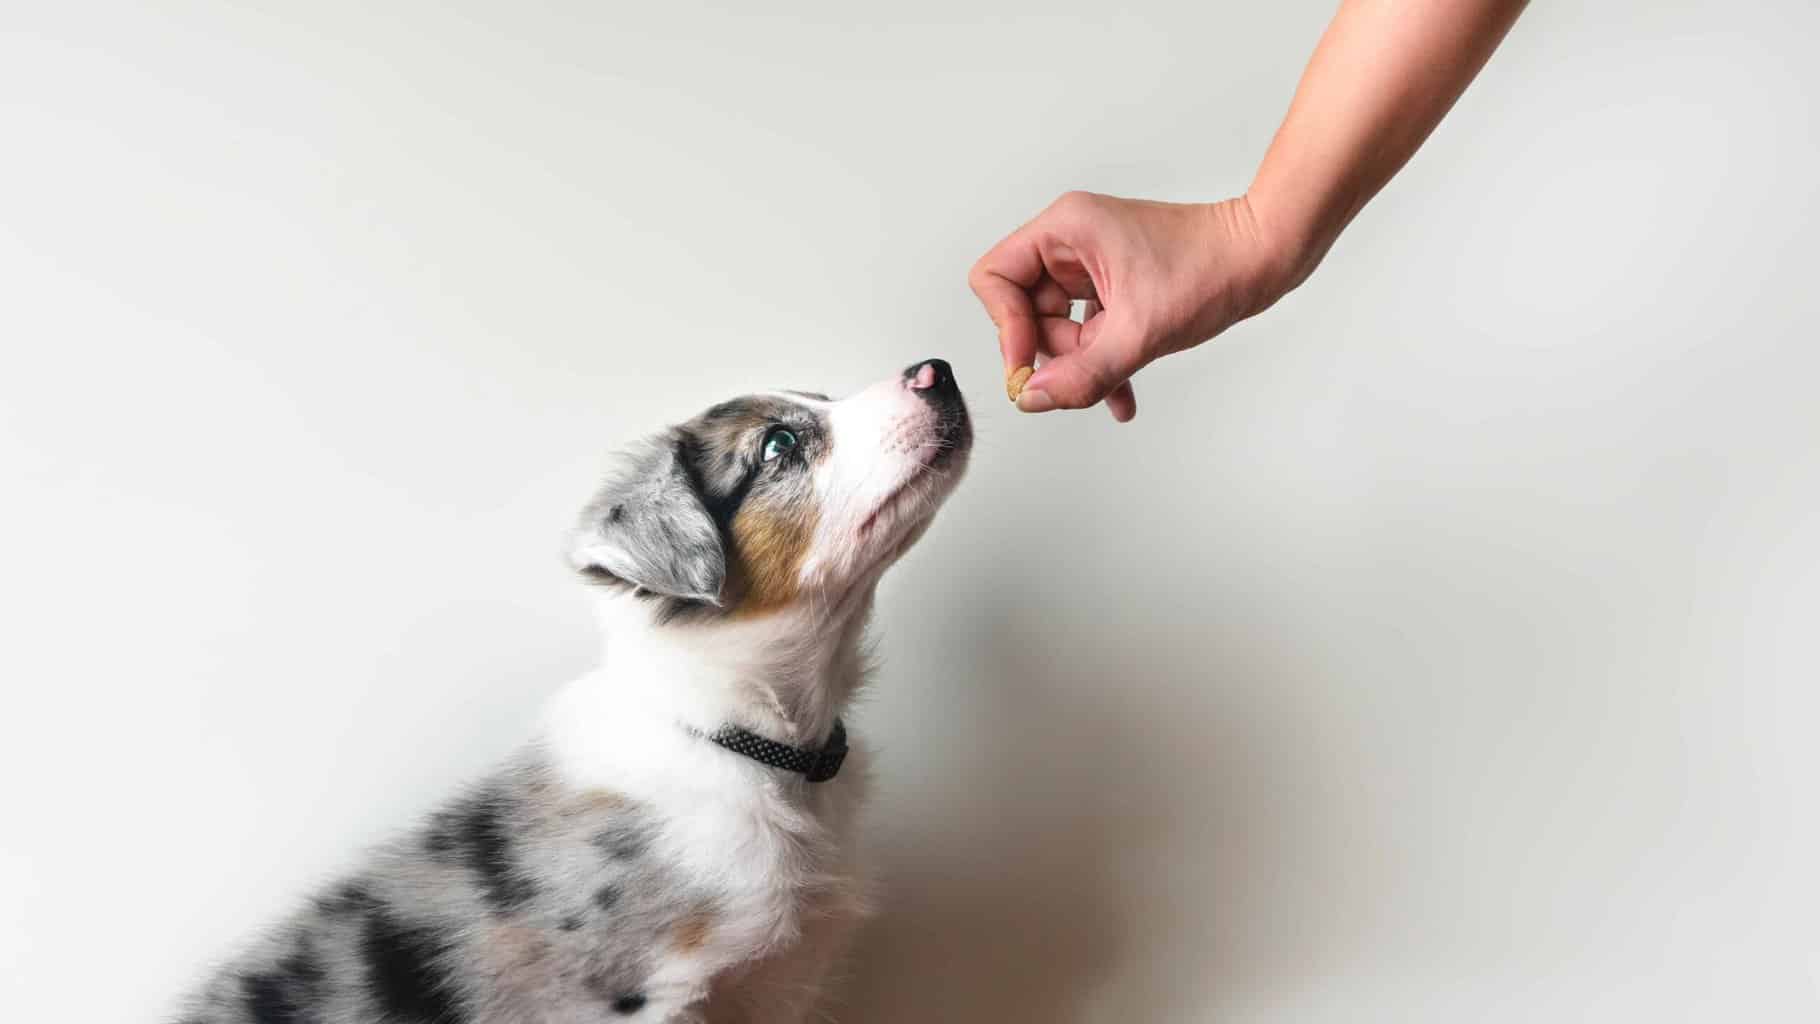 Owner uses treat to reward Australian shepherd puppy for good behavior. Use these training tips for success: Feed health treats as rewards, start training early and always be consistent to prevent bad behavior.